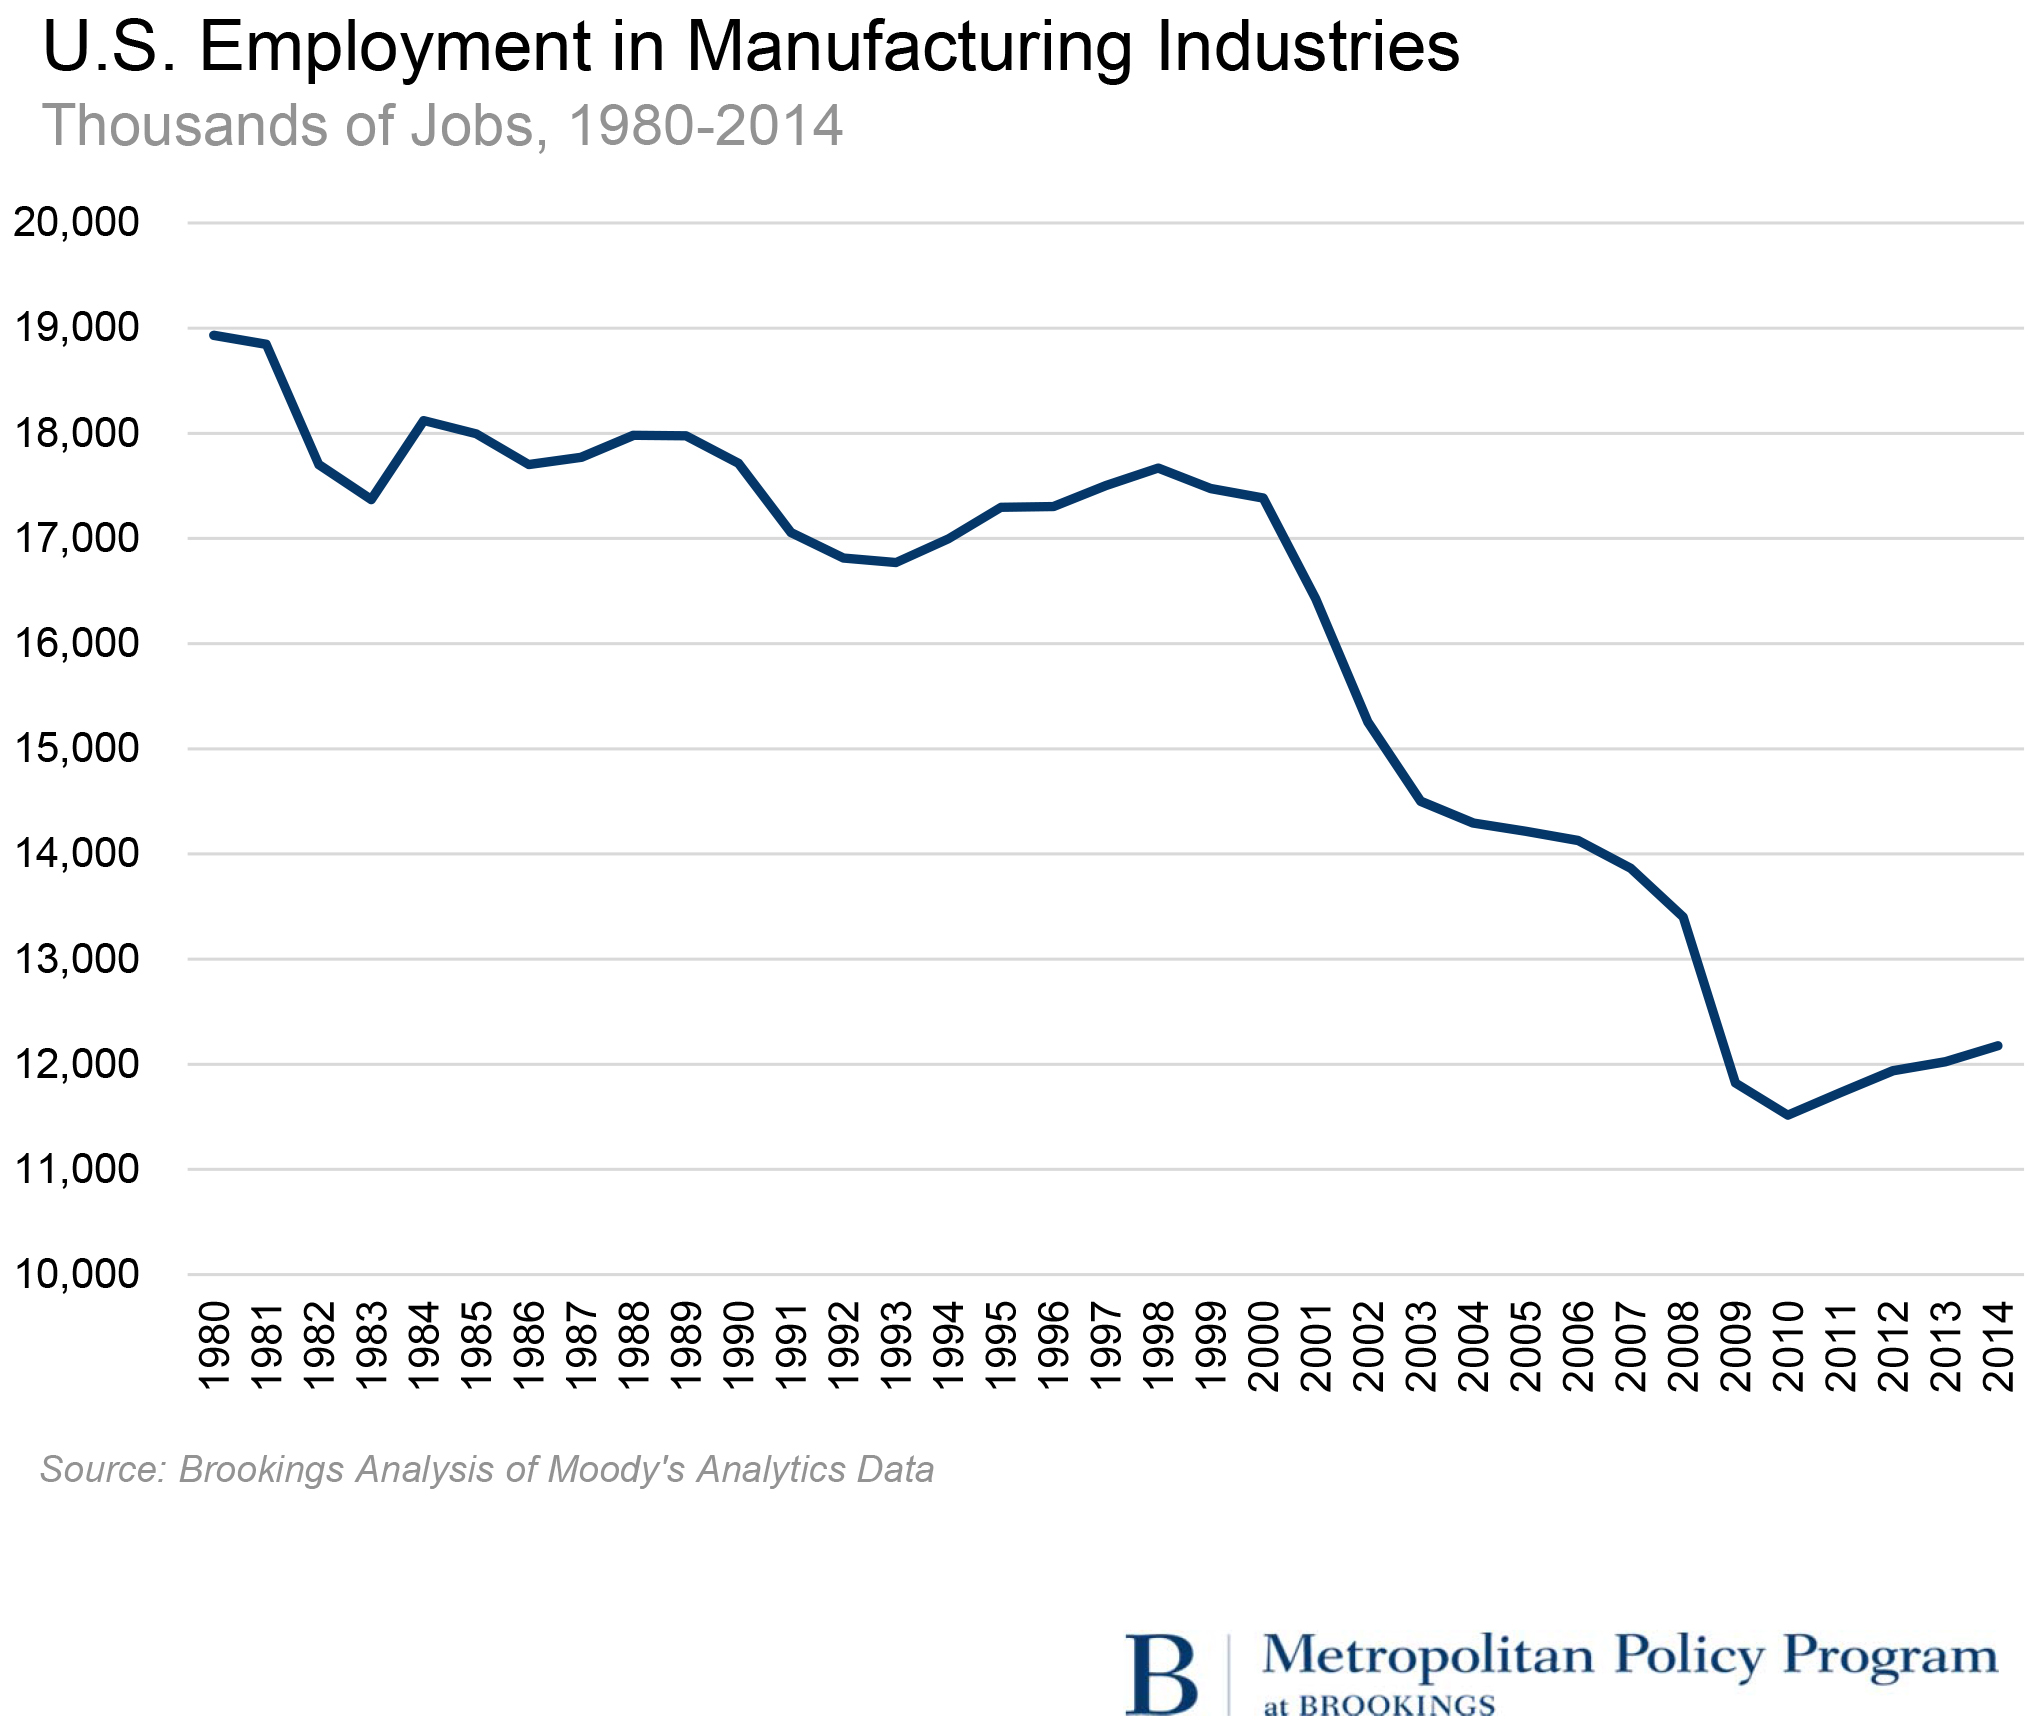 MM and SK on Voter Anger Manufacturing Employment Decline1